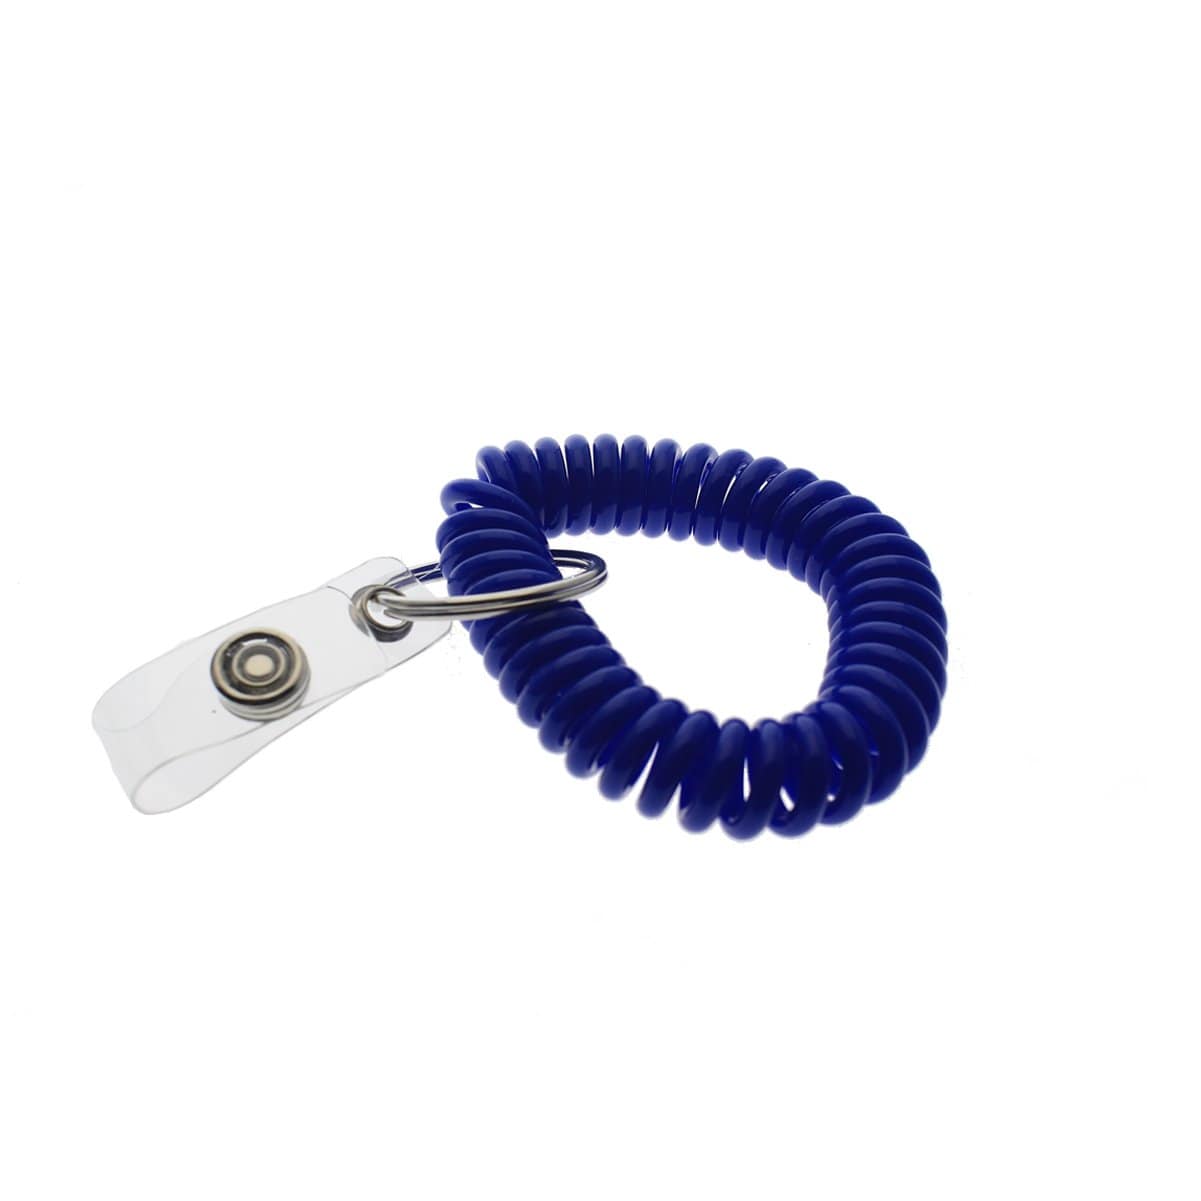 Blue Plastic 23 Coil Key Chain with Clip â€“ 12 Pack